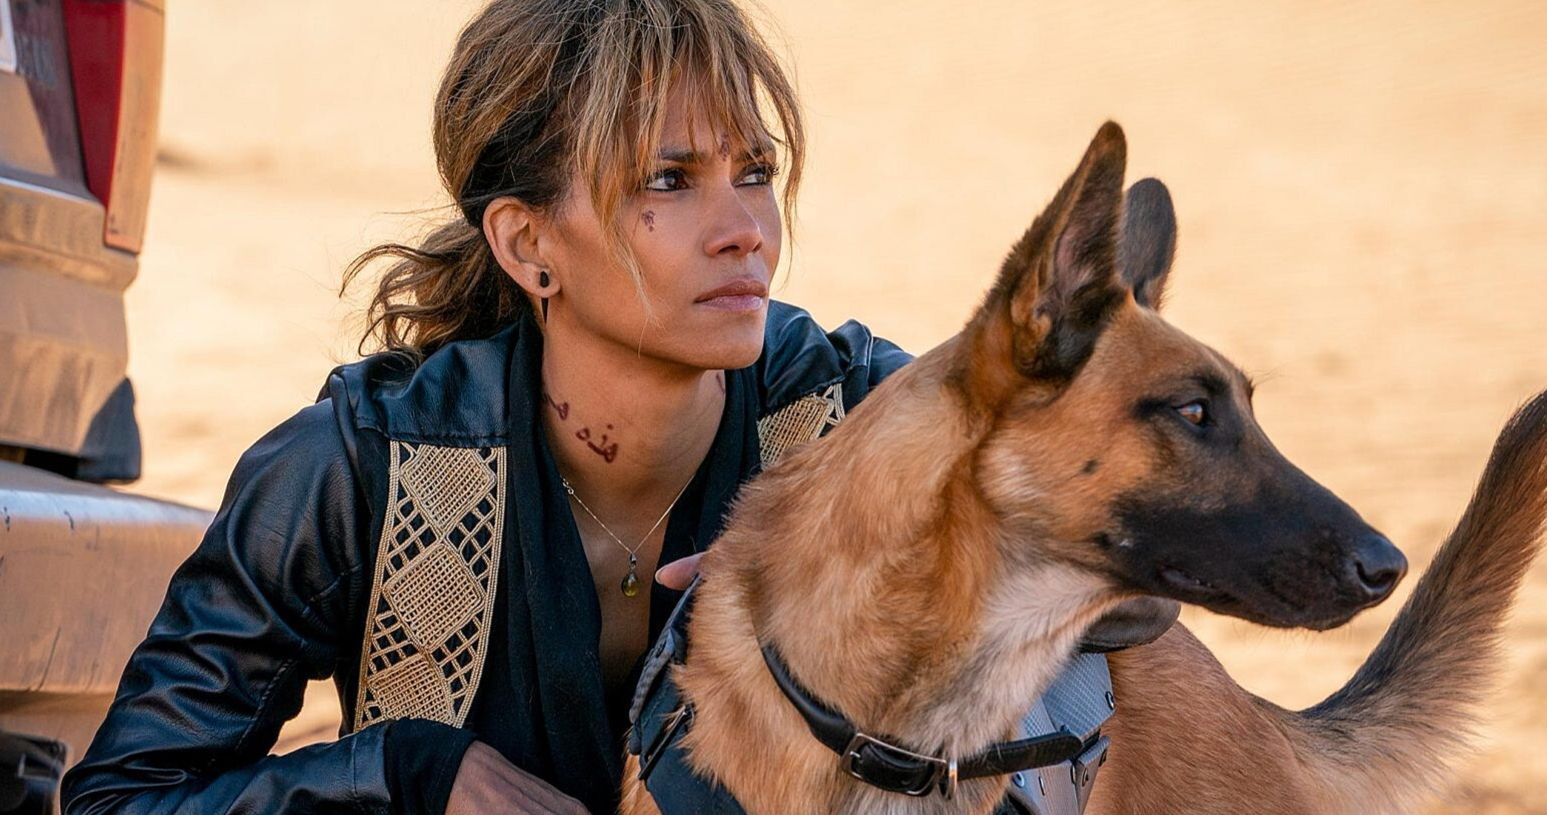 Halle Berry Did All But These Two Very Dangerous Stunts in John Wick 3